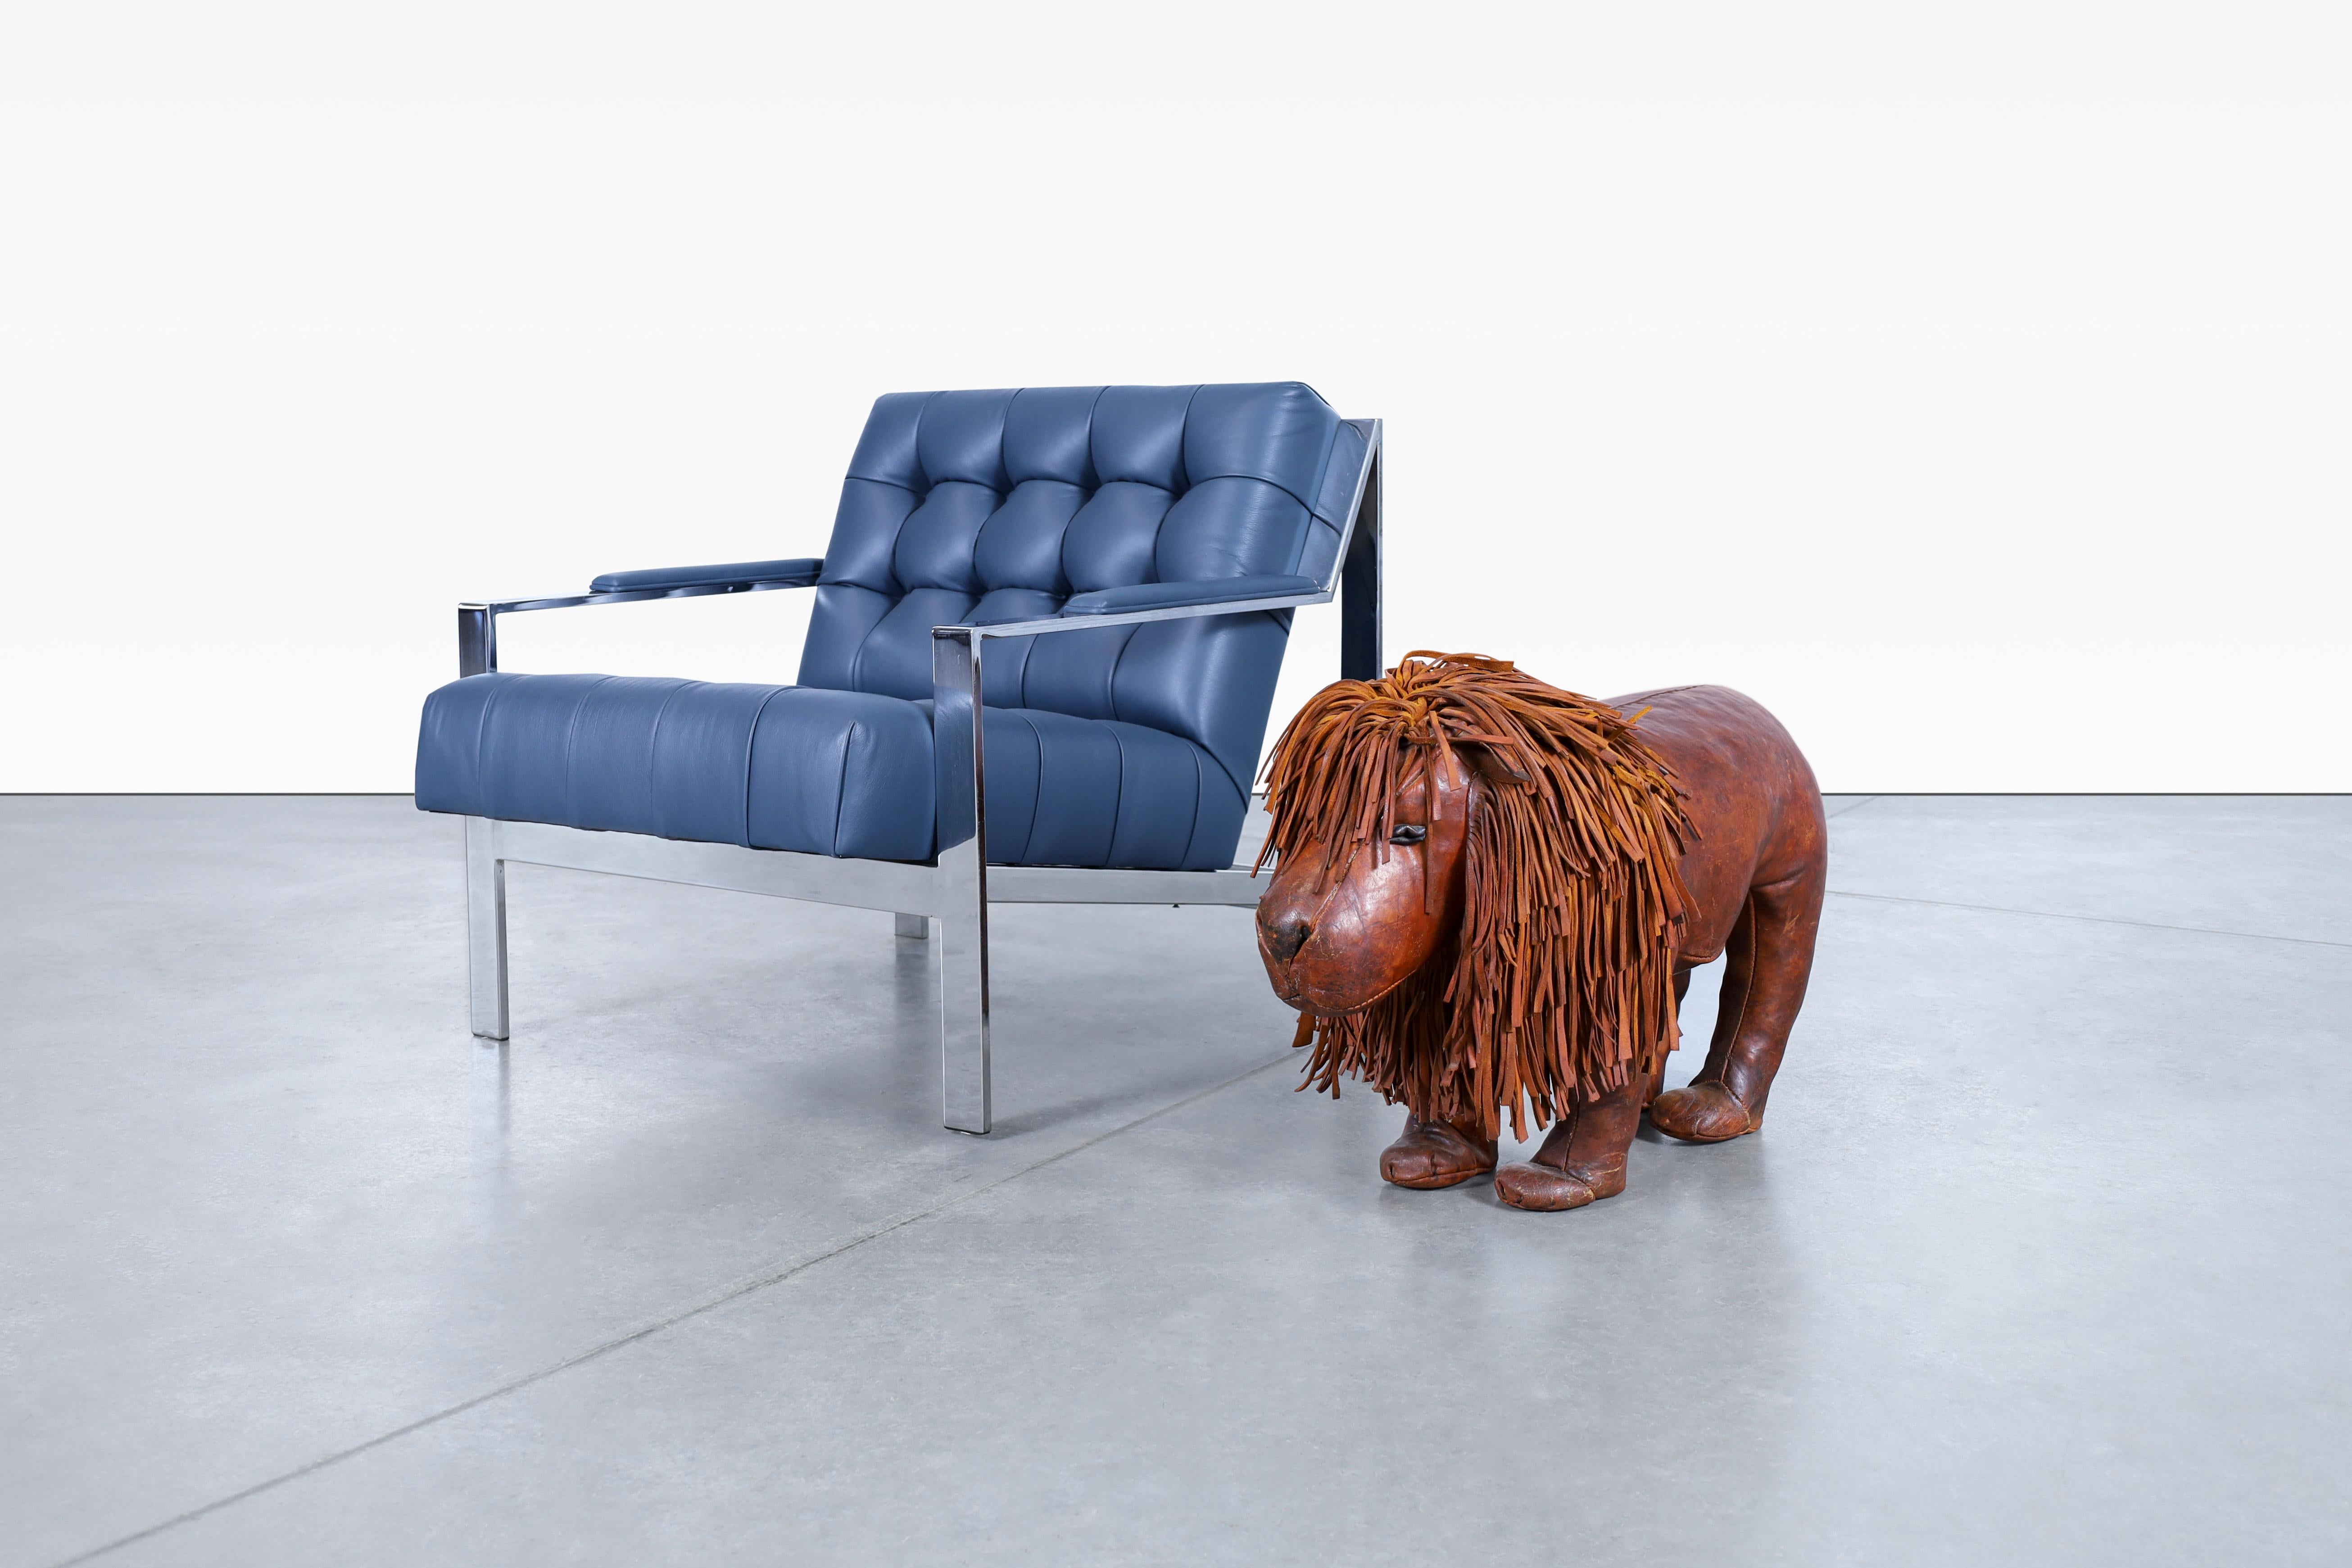 Adorable vintage leather lion footstool by Dimitri Omersa, manufactured in England, circa 1960s. Meticulously manufactured by Abercrombie and Fitch, this footstool showcases the high-quality craftsmanship and exquisite design. Originally designed to